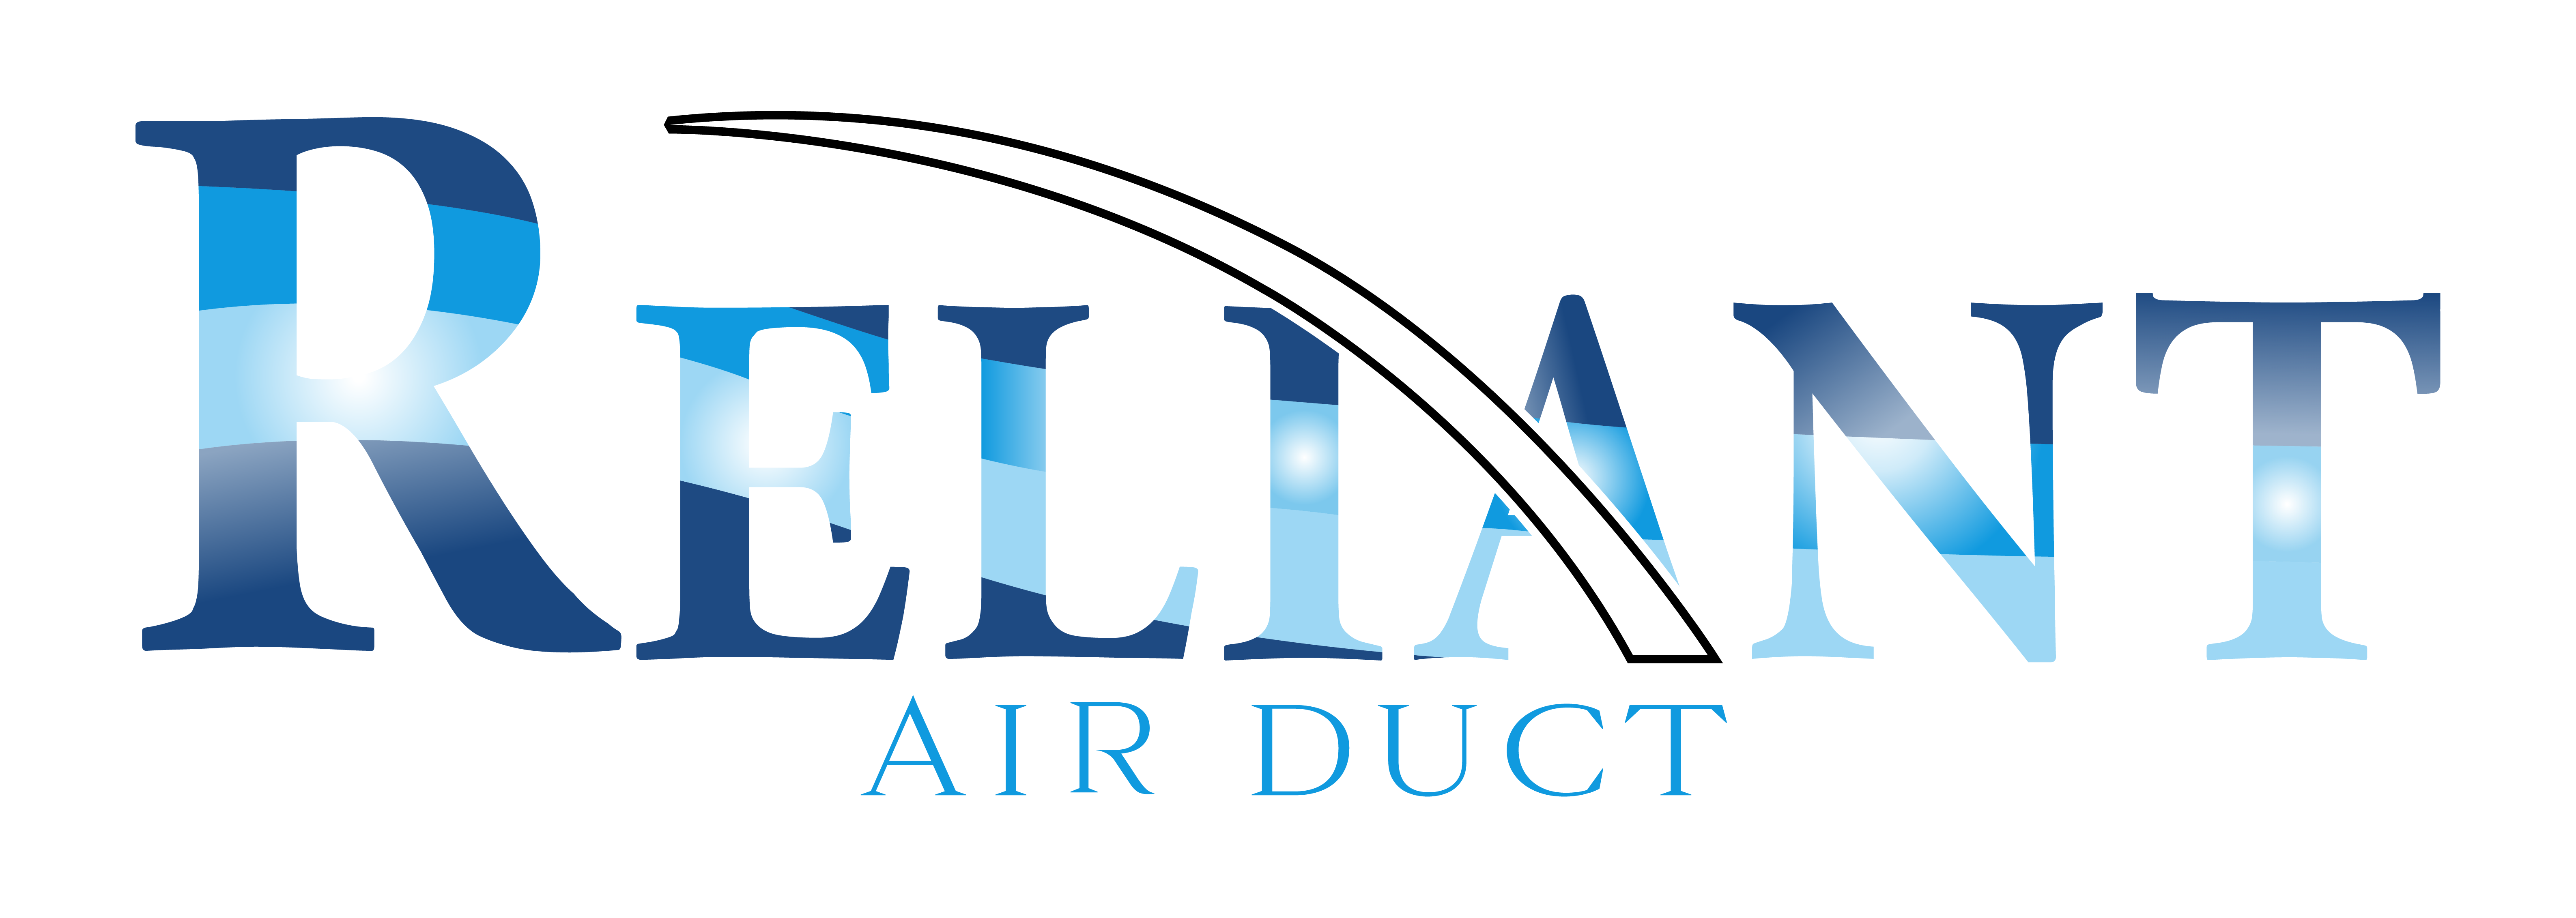 Best Air Duct Cleaning Service Dallas | Air Duct Cleaning Near Dallas Tx